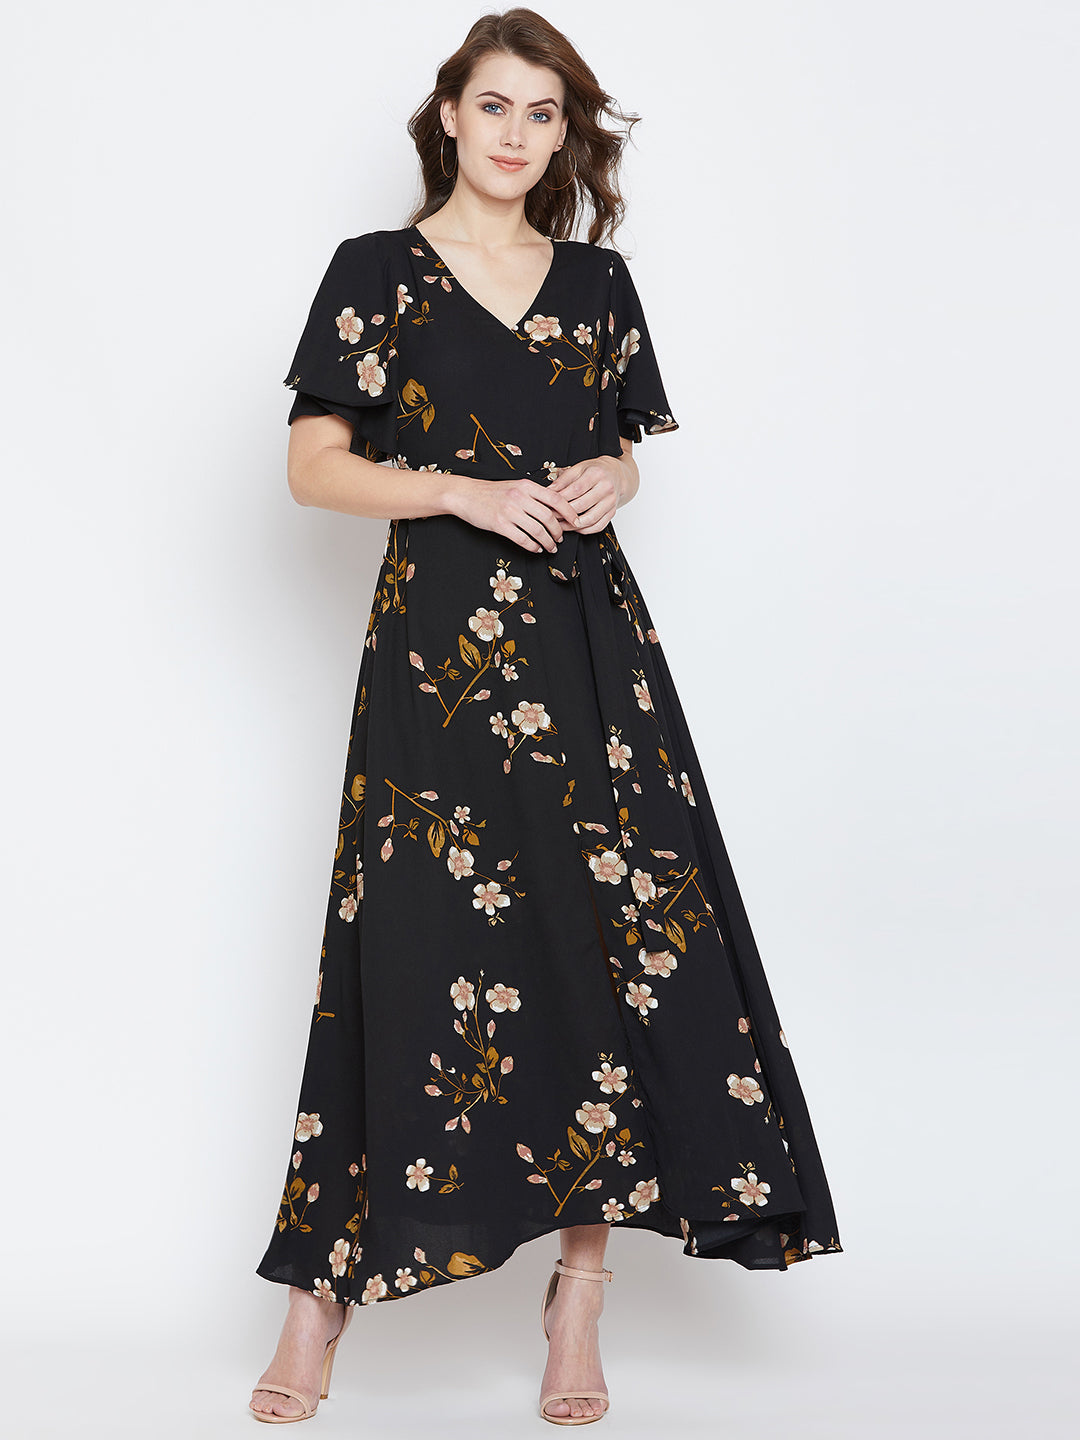 Black Floral Dress | Why it's OK to Wear Dark Florals for Spring